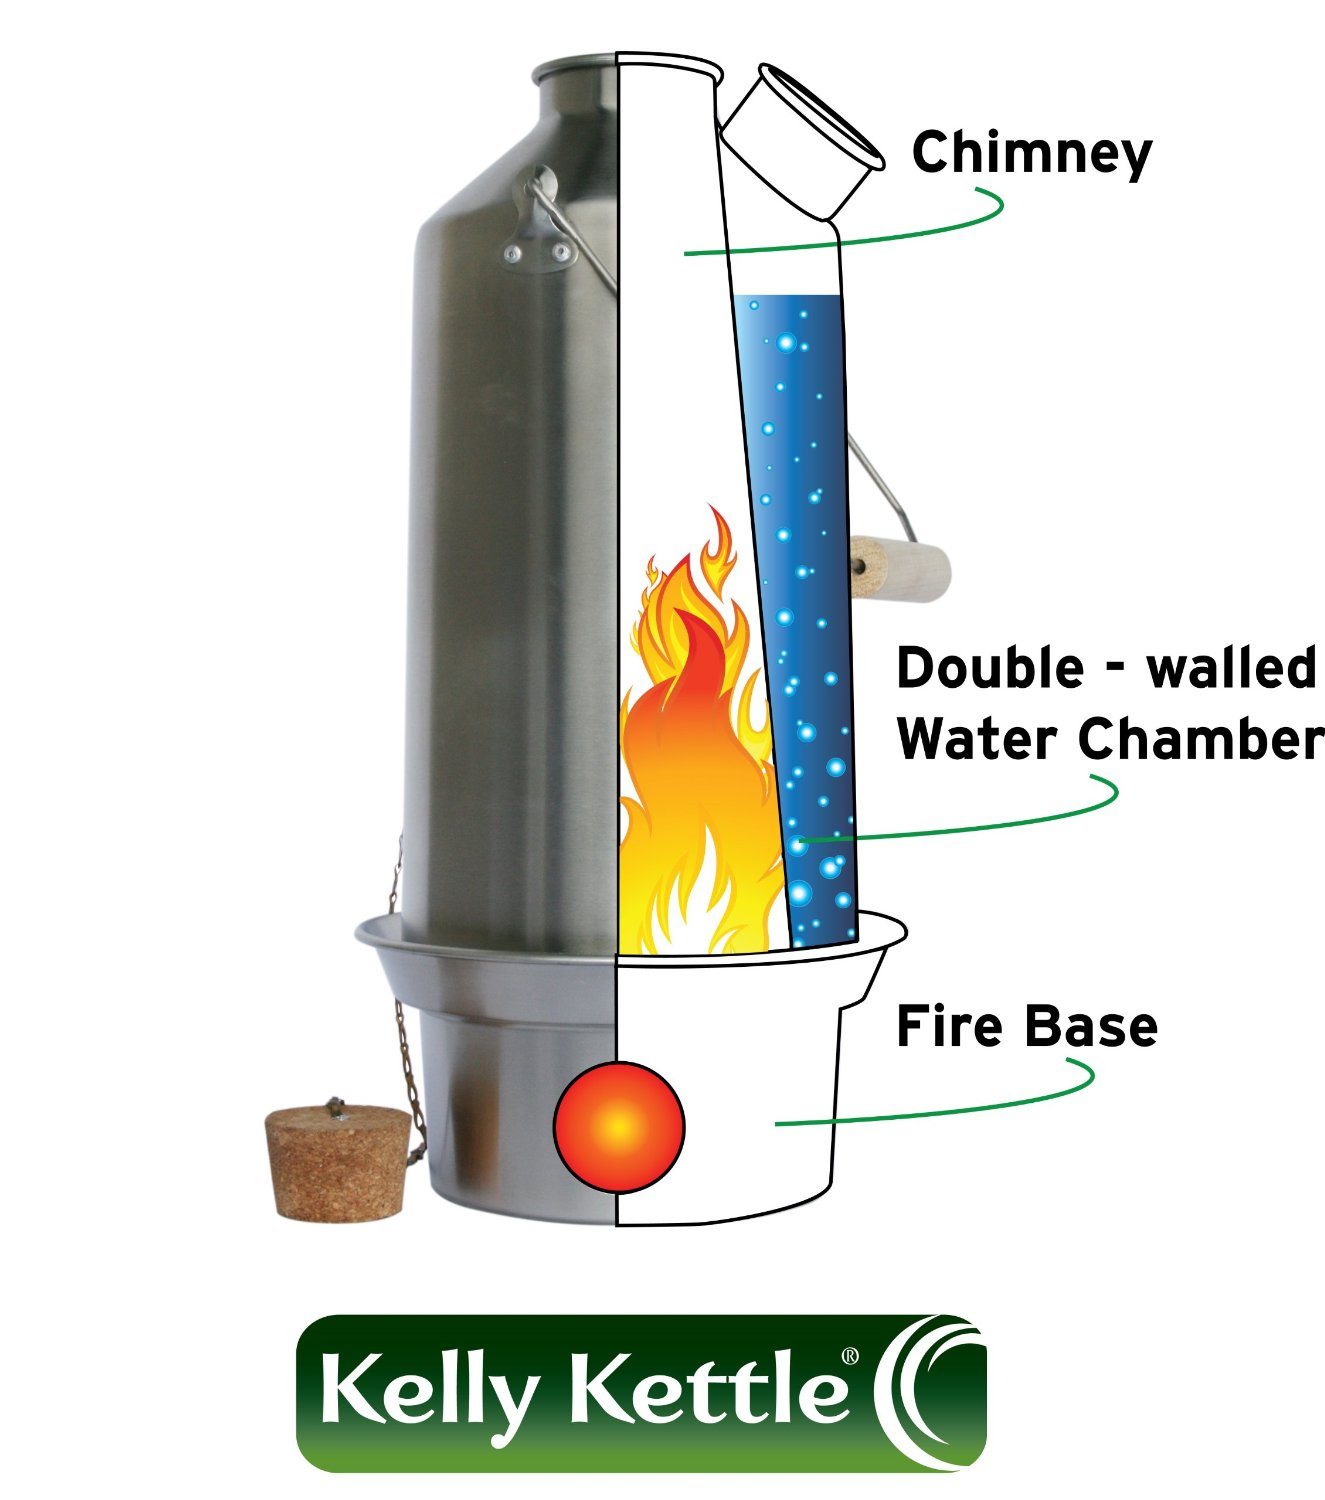 How the Kelly Kettle works